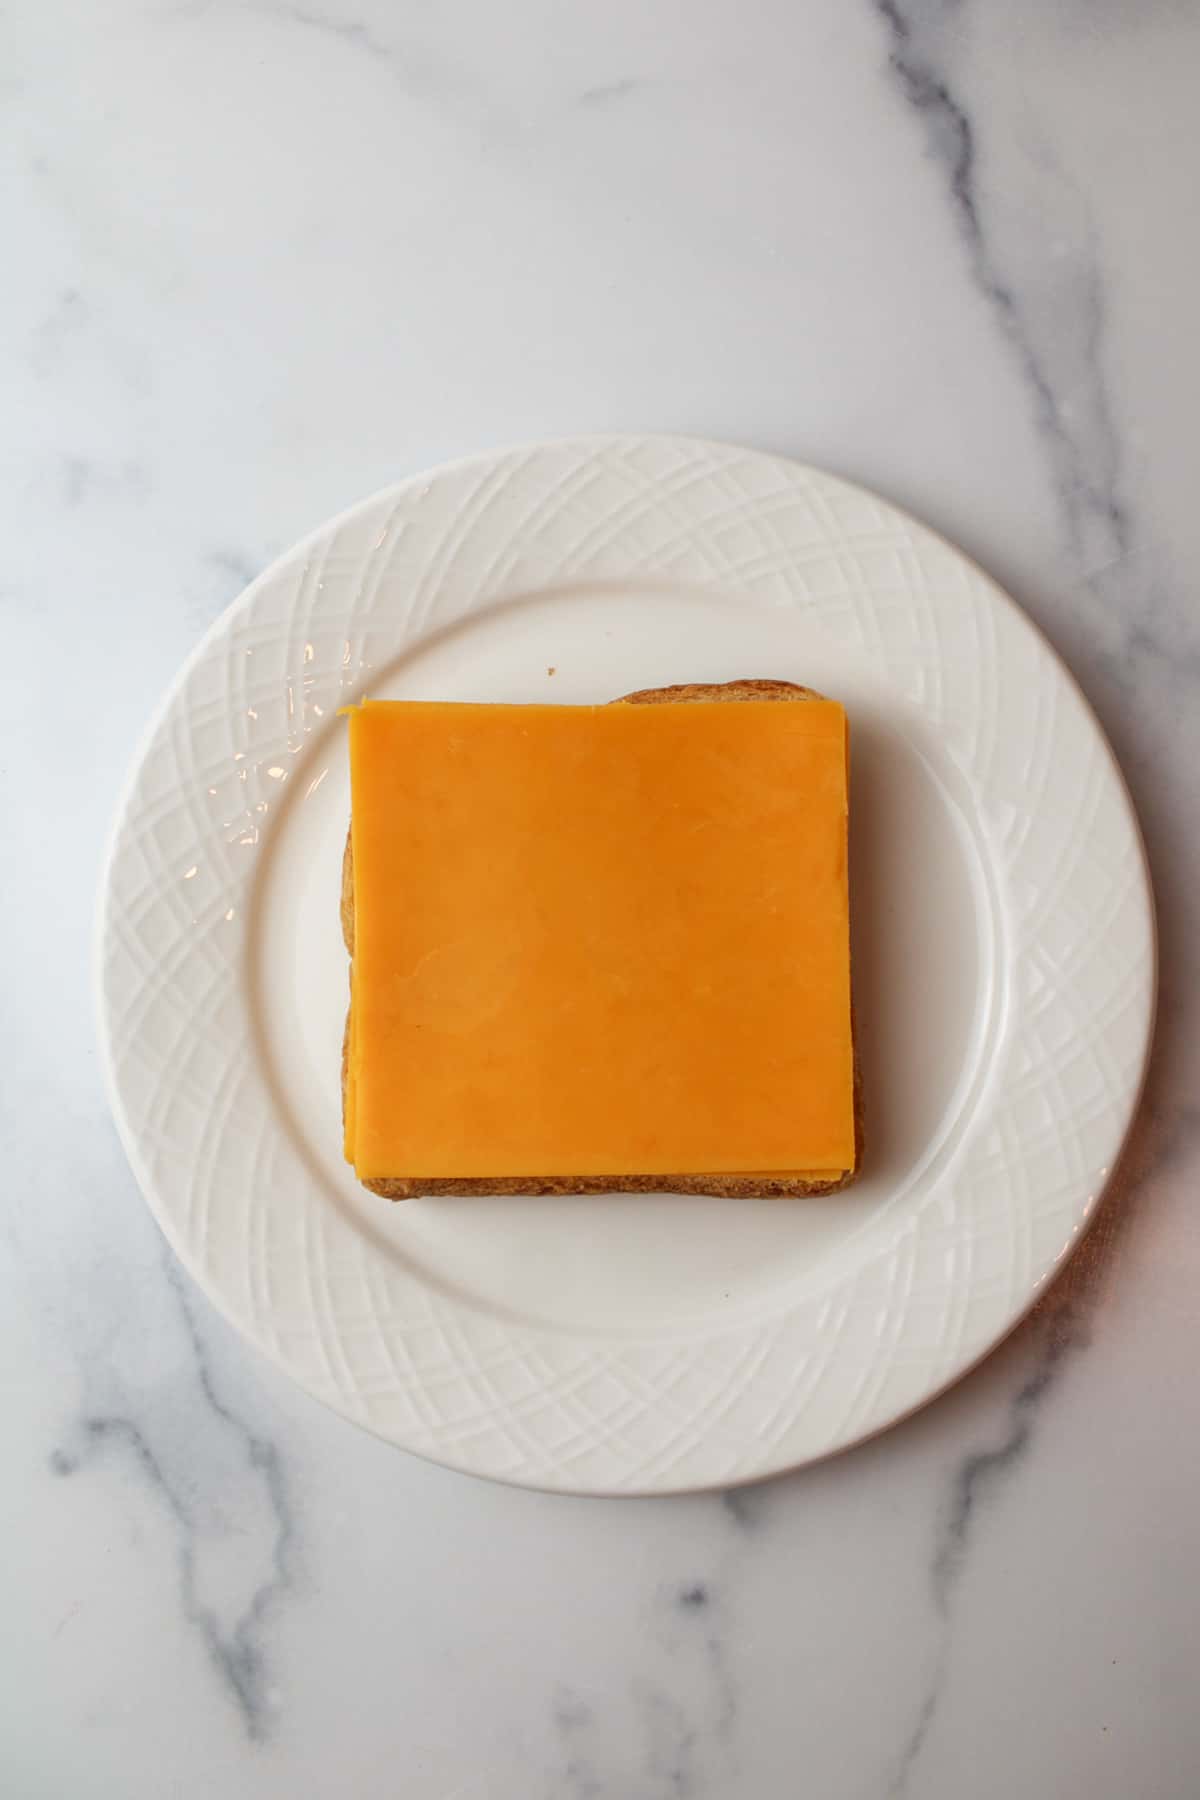 slice of cheddar cheese on toast on a white plate.